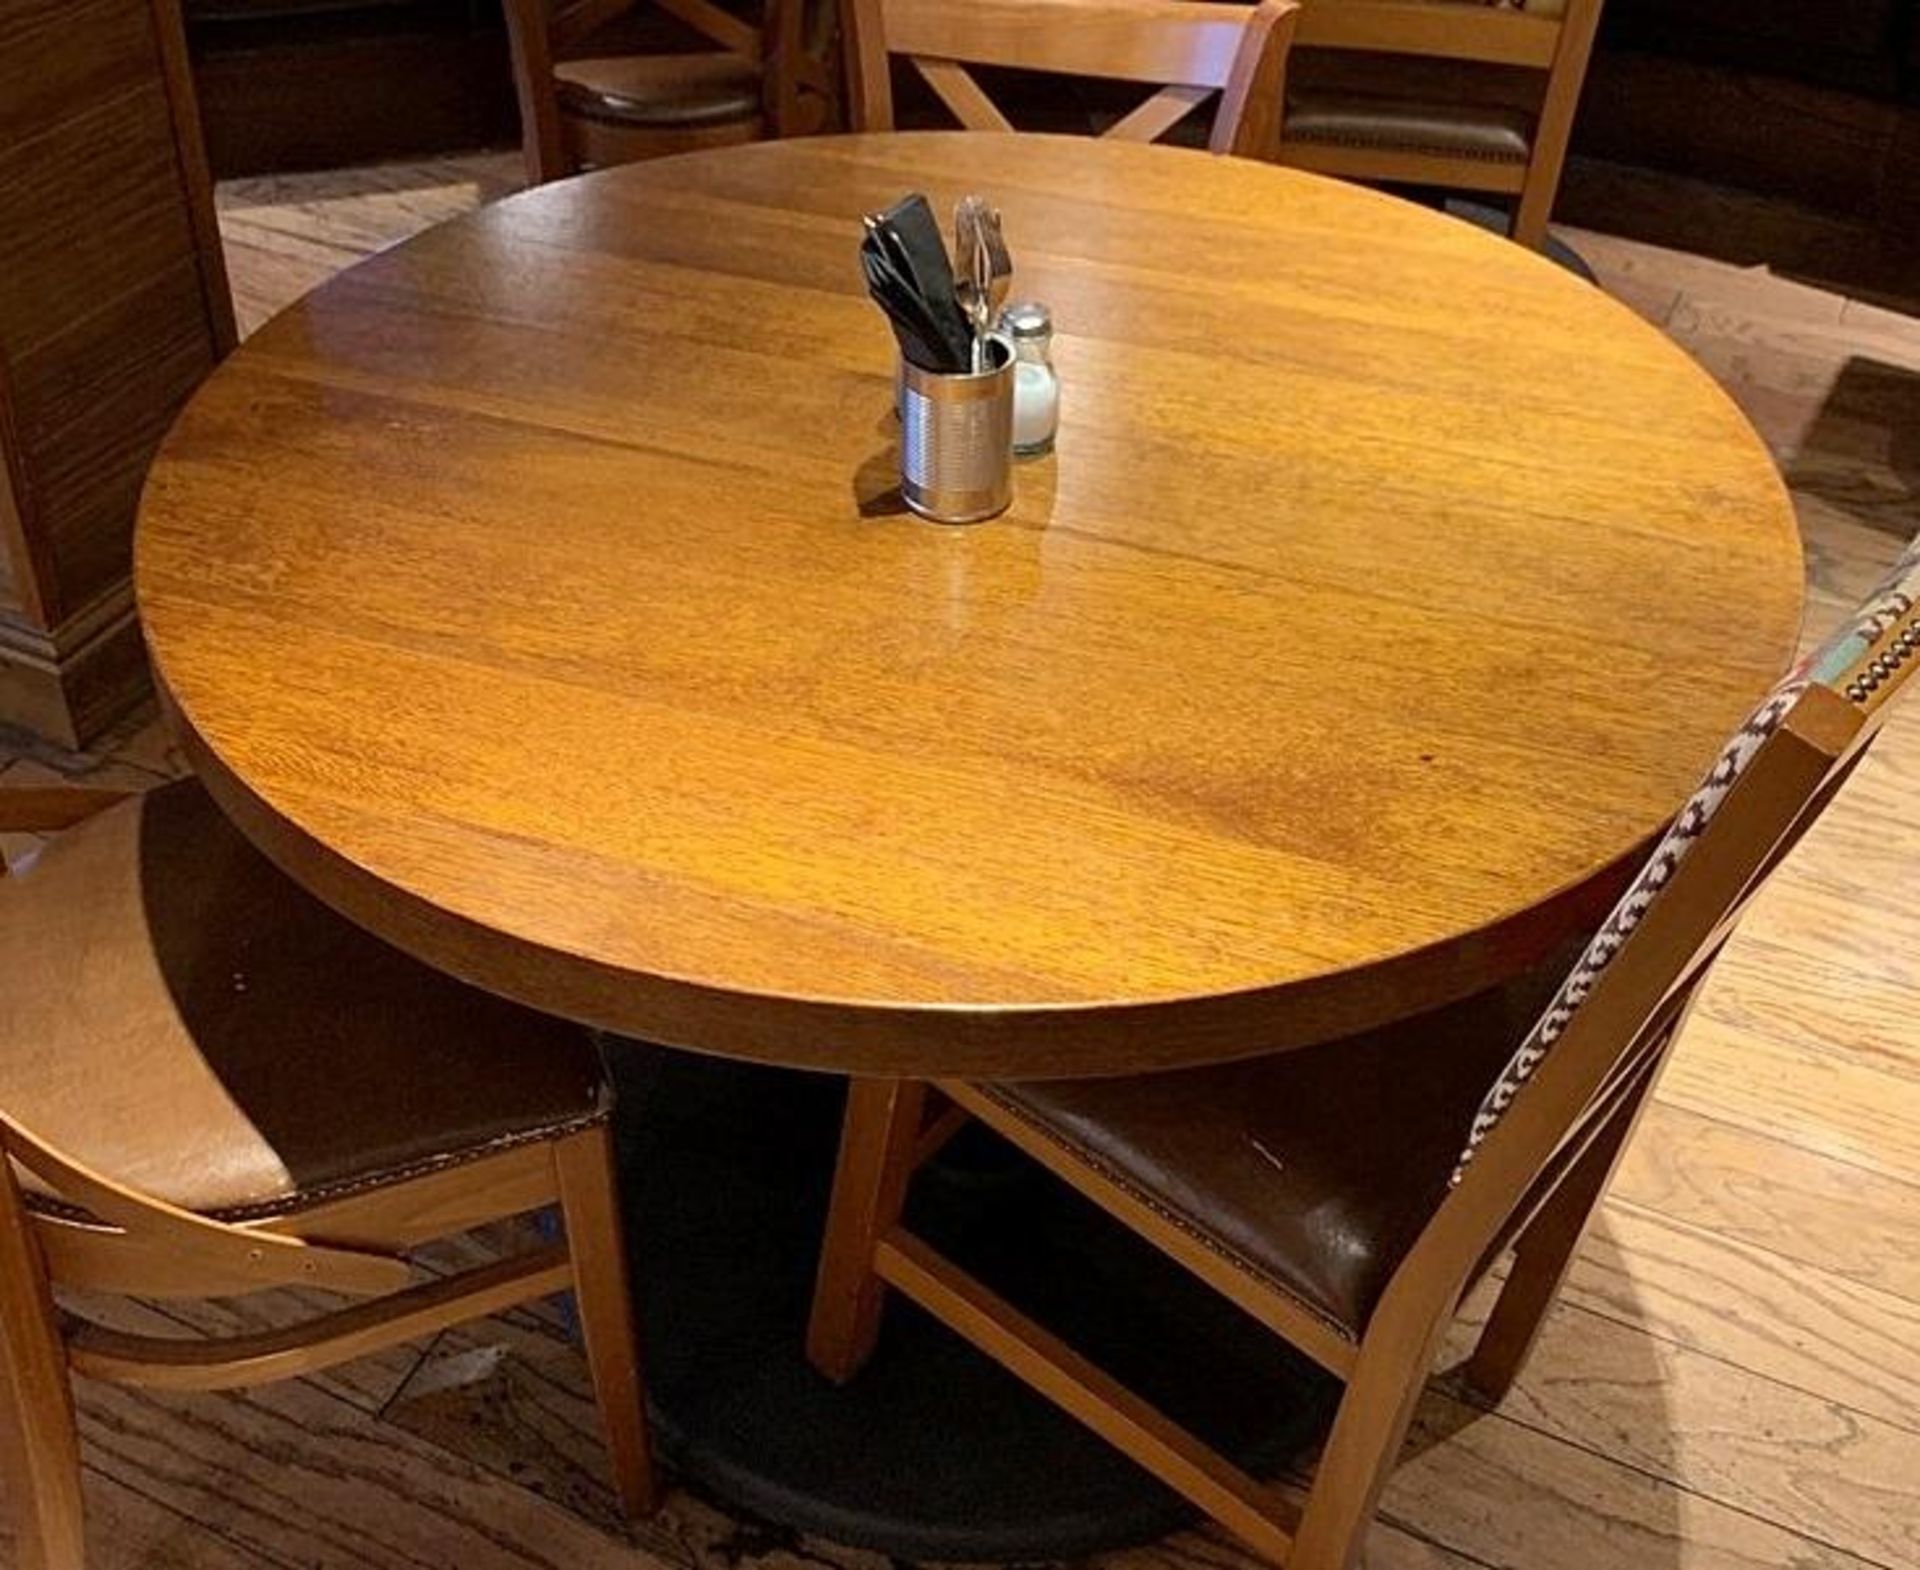 1 x Large Circular Wood And Metal Dining Table - Dimensions: W110cm H77cm - CL339 - From a Popular M